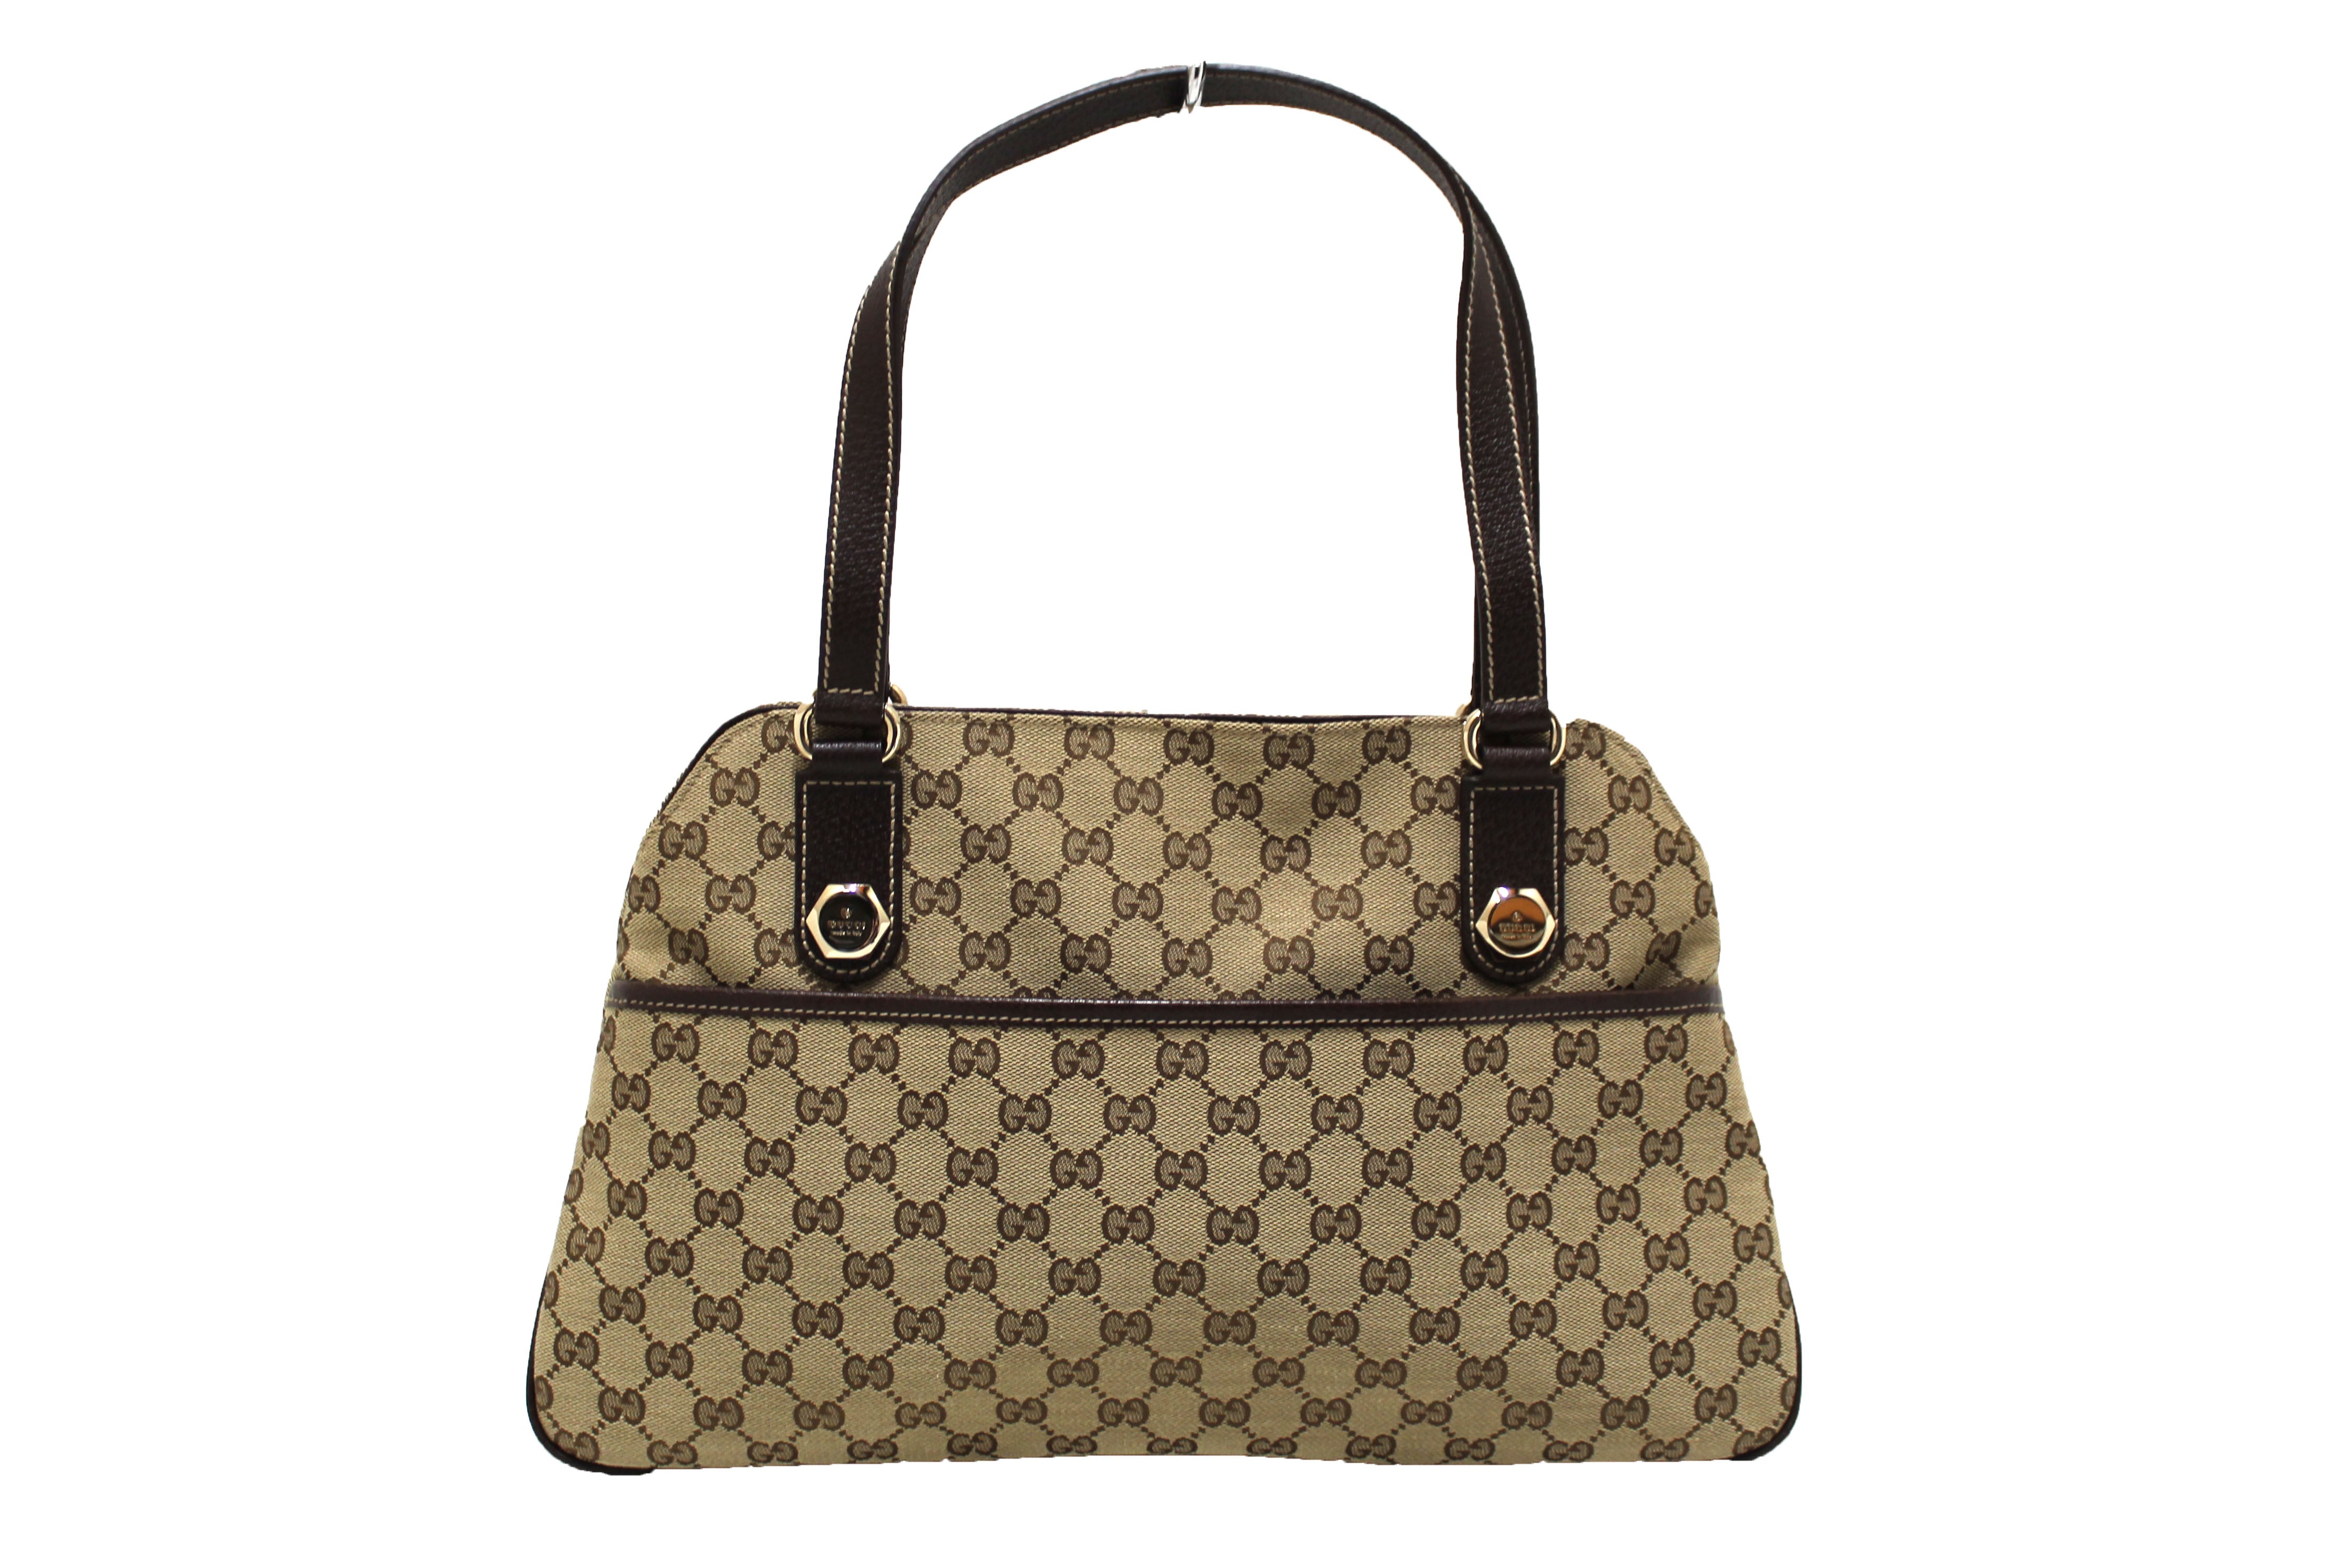 Gucci, Bags, Authentic Gucci Speedy Bag Size 3 Used Condition